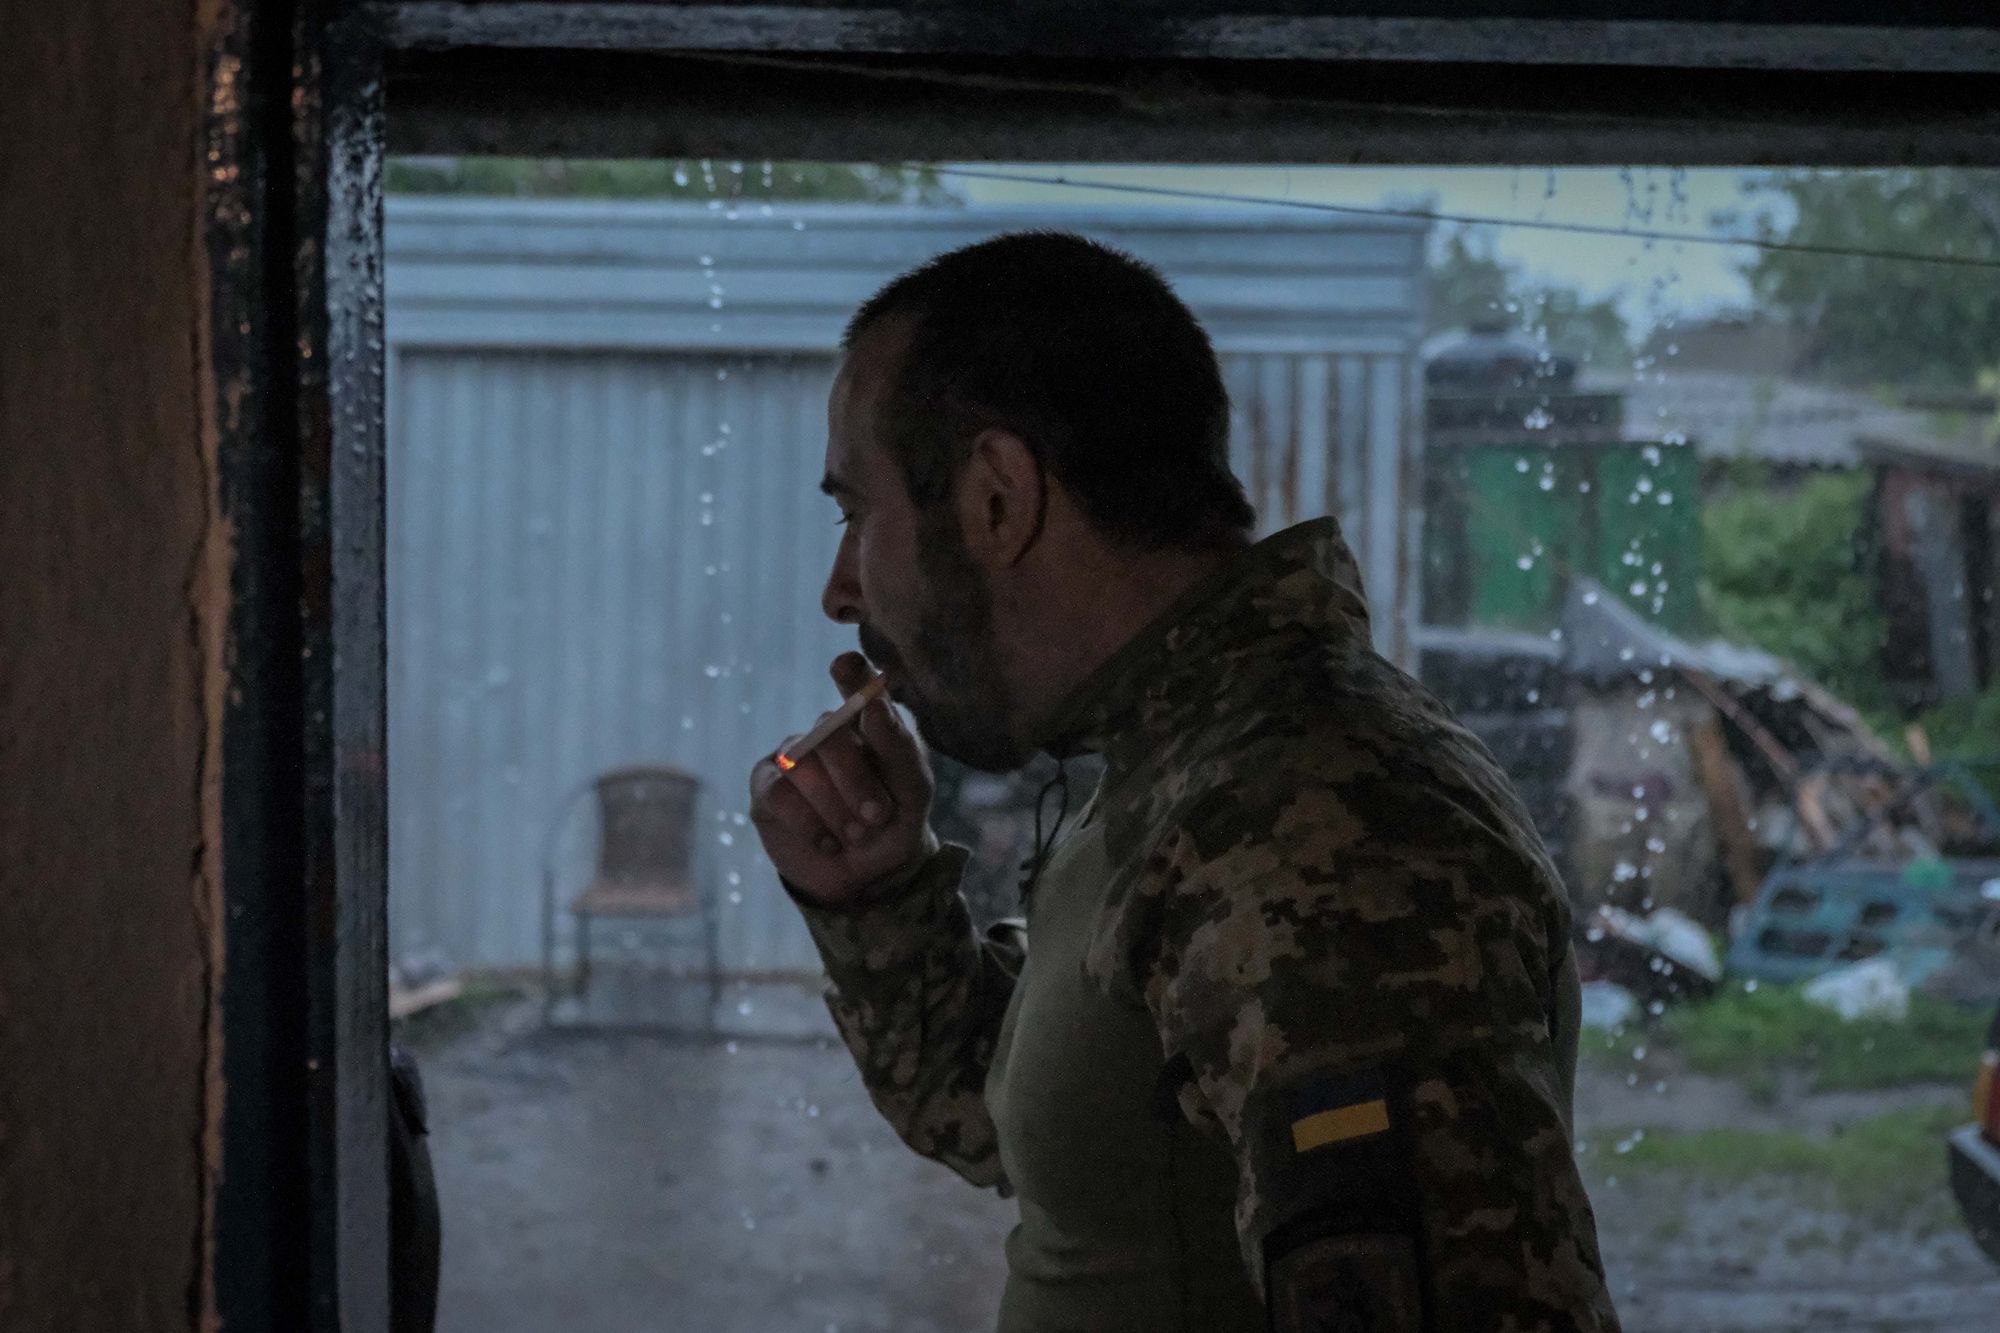 On Ukraine’s southern front line, tension in the air before decisive counteroffensive